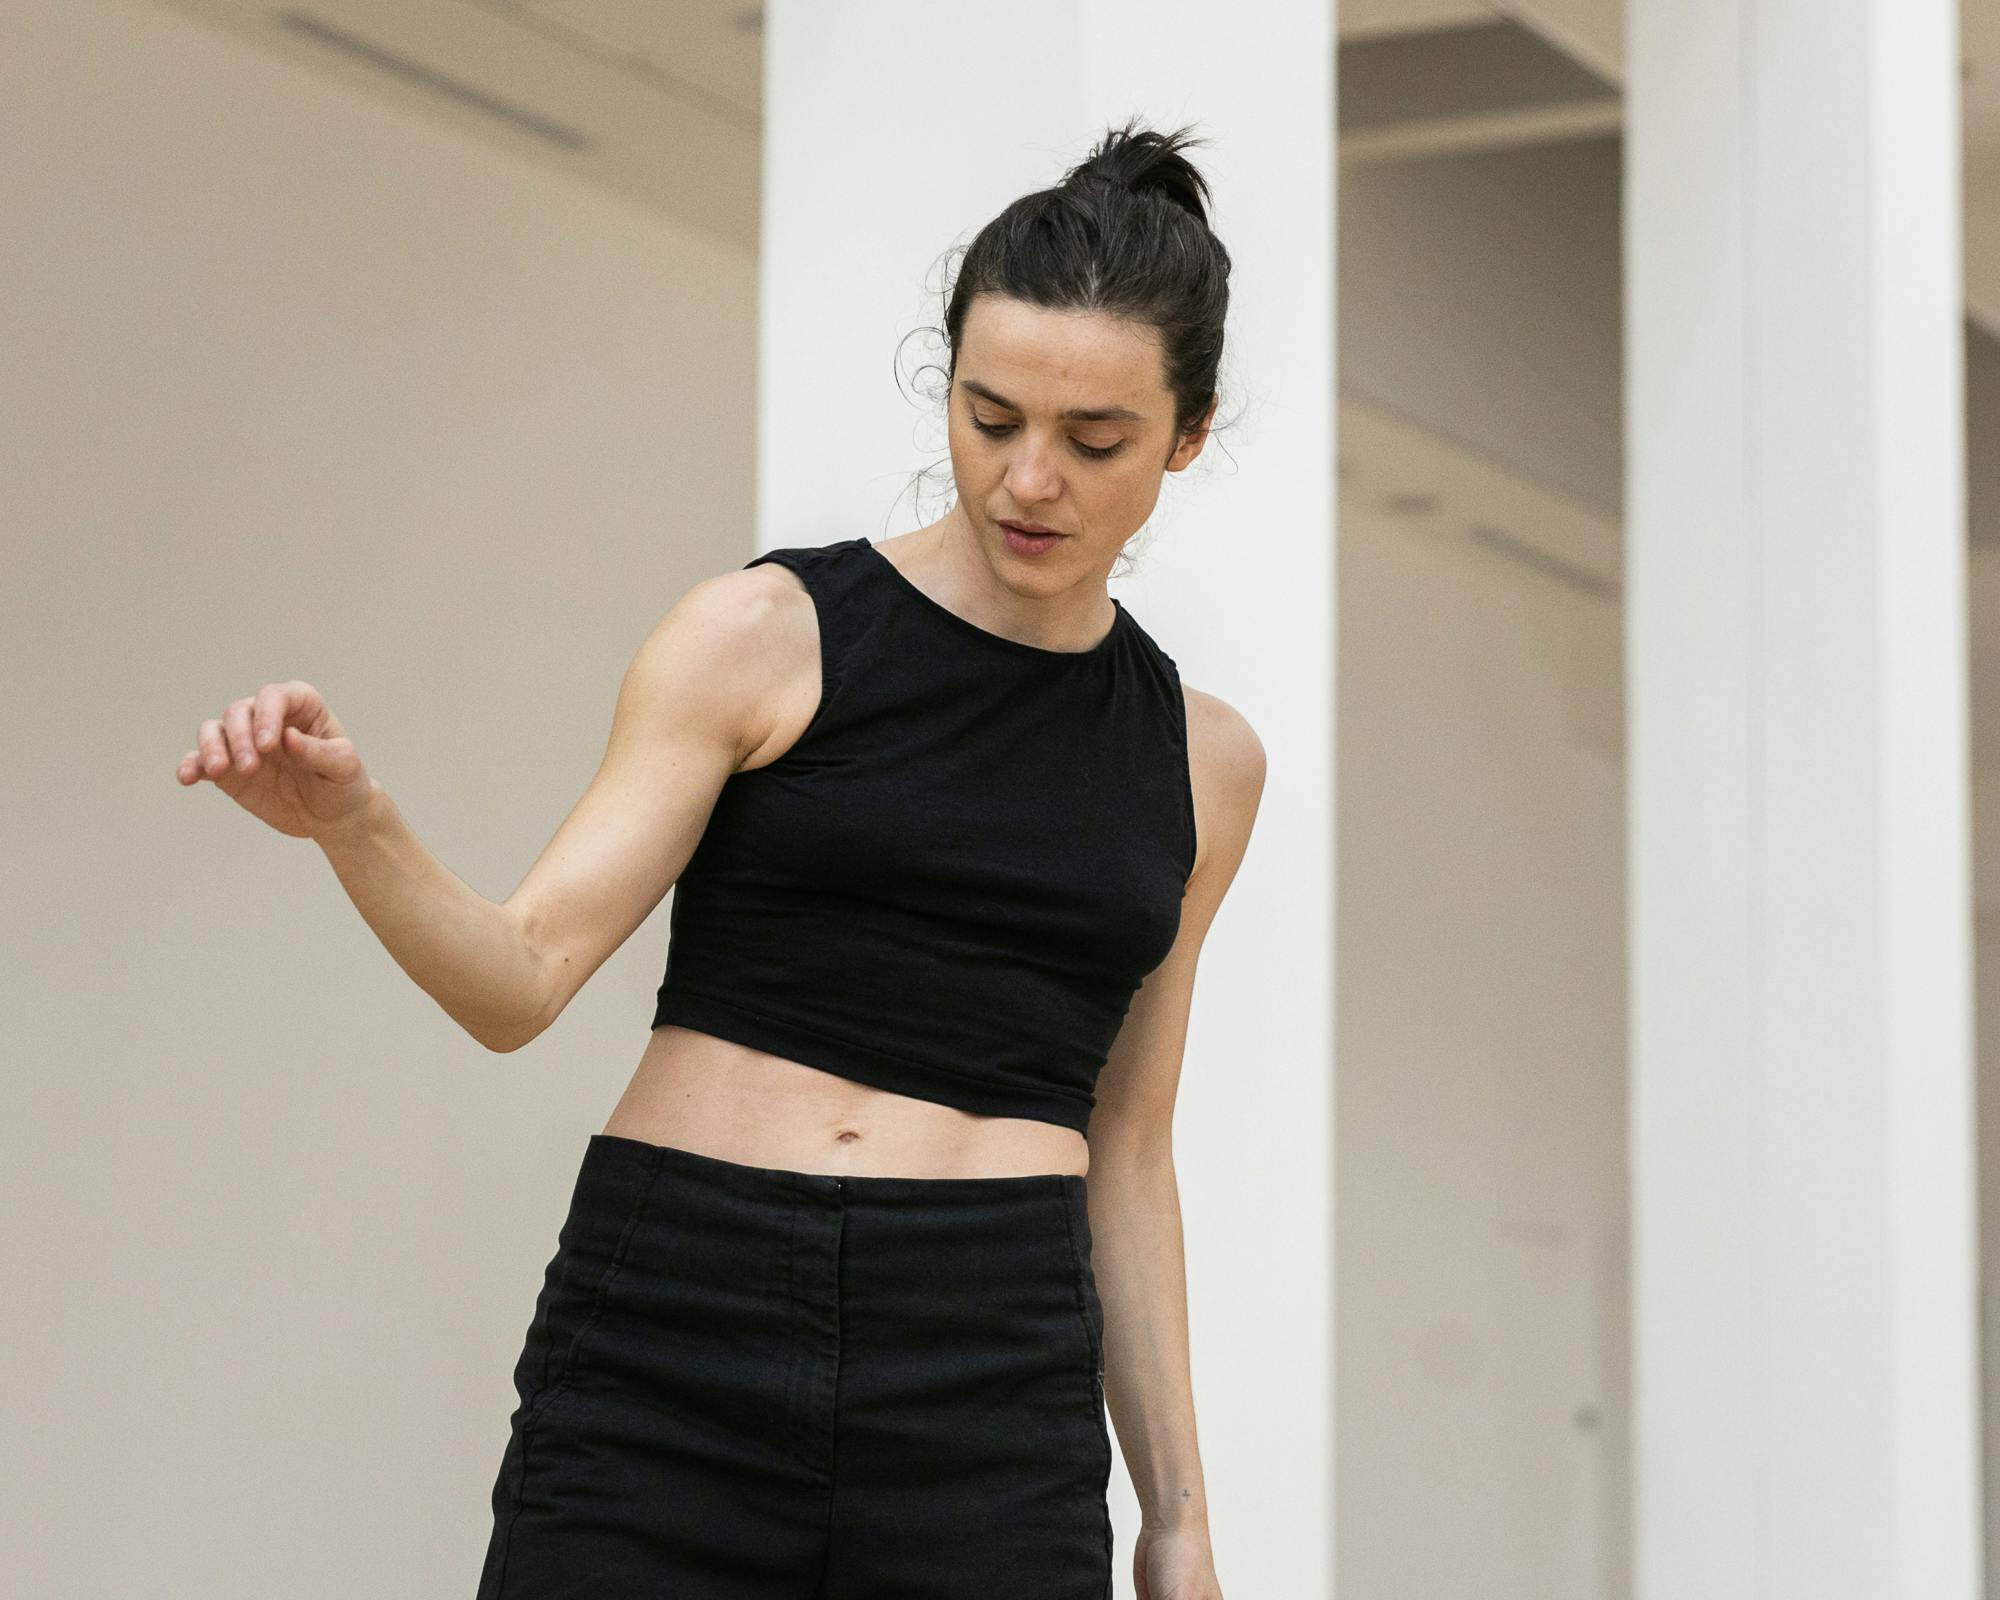 Annamaria Ajmone in rehearsal. She is wearing a black tank top and dark pants and is raising her right arm, bent, to shoulder height.